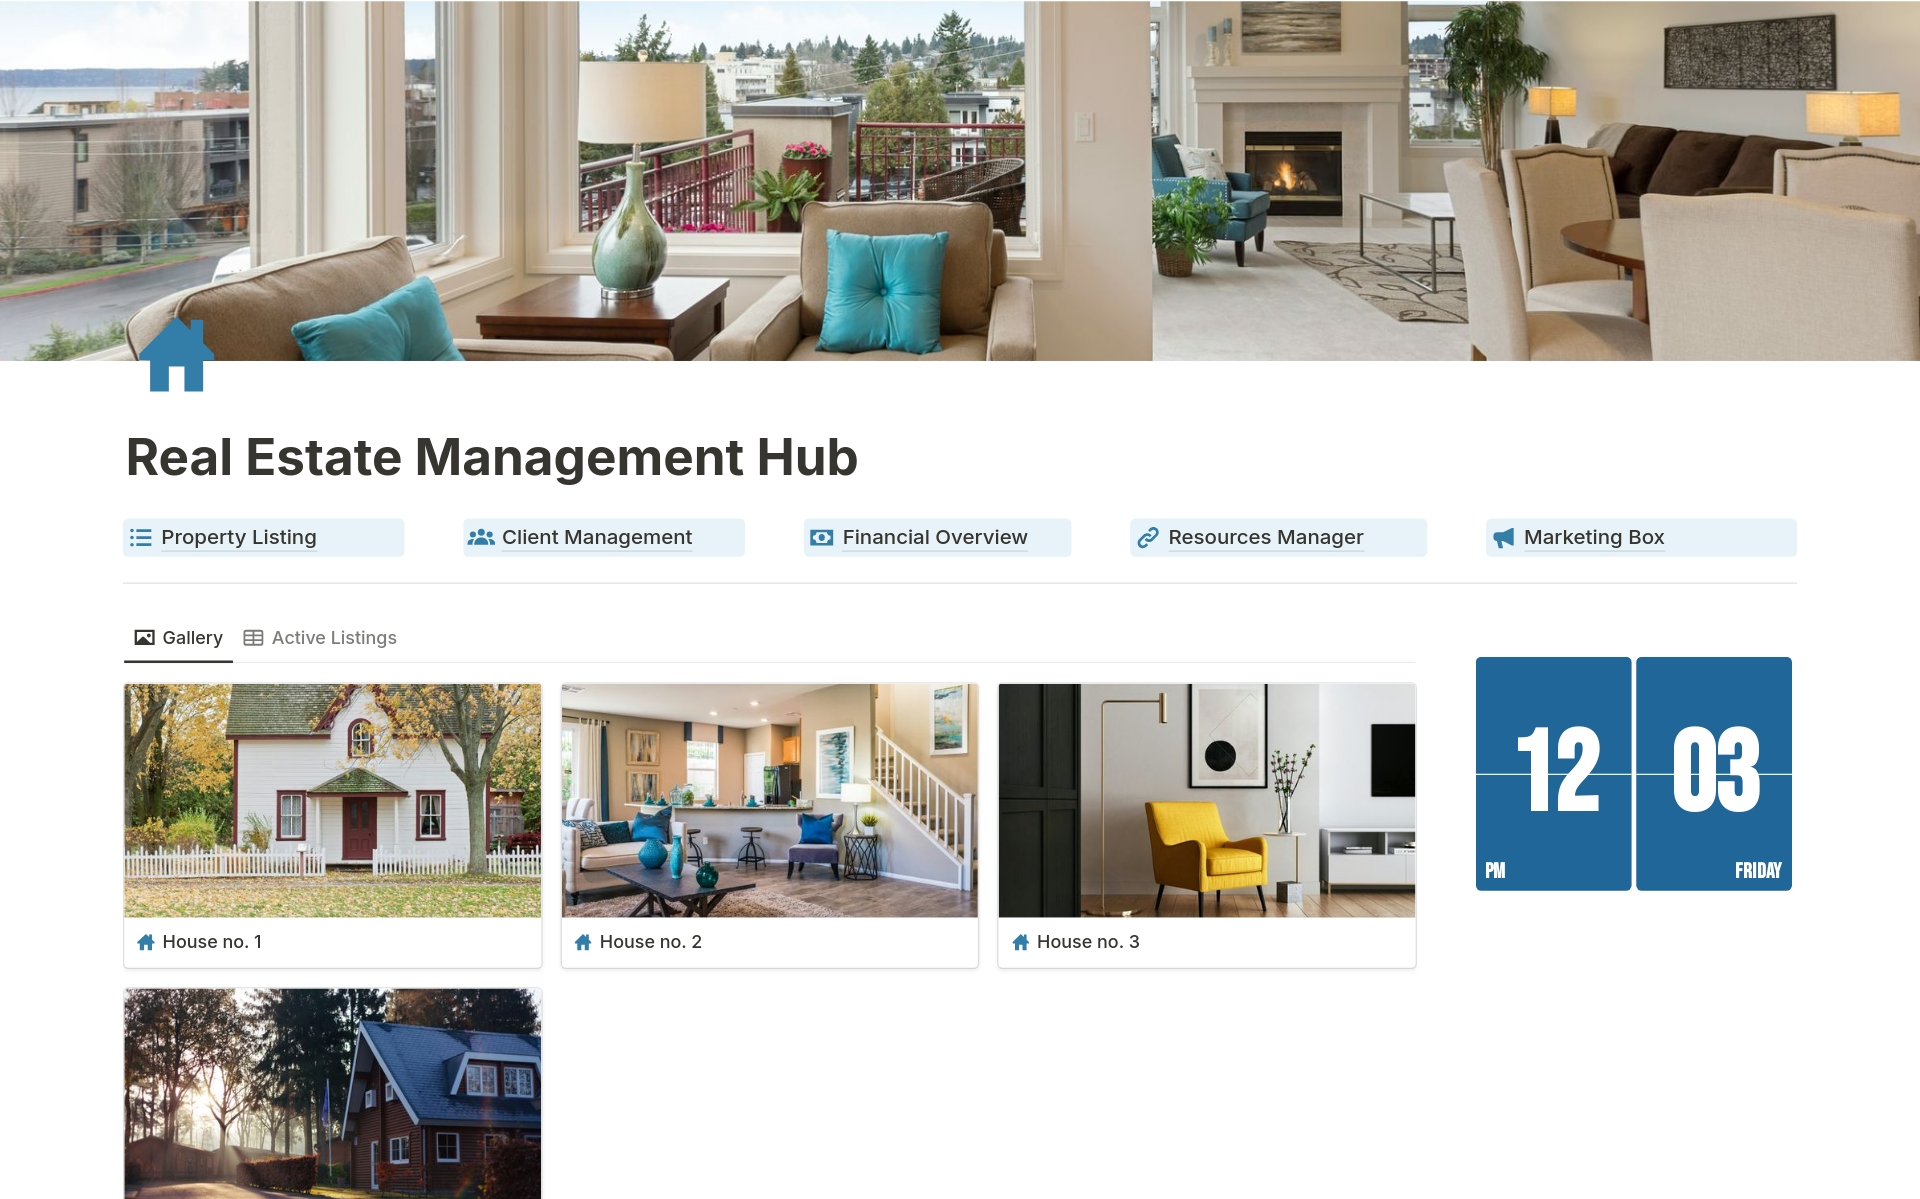 The Real Estate Management Hub Notion template is designed for Real Estate Agencies. This hub simplifies property management, client interactions, and financial tracking, enhancing efficiency and organization in daily real estate operations.